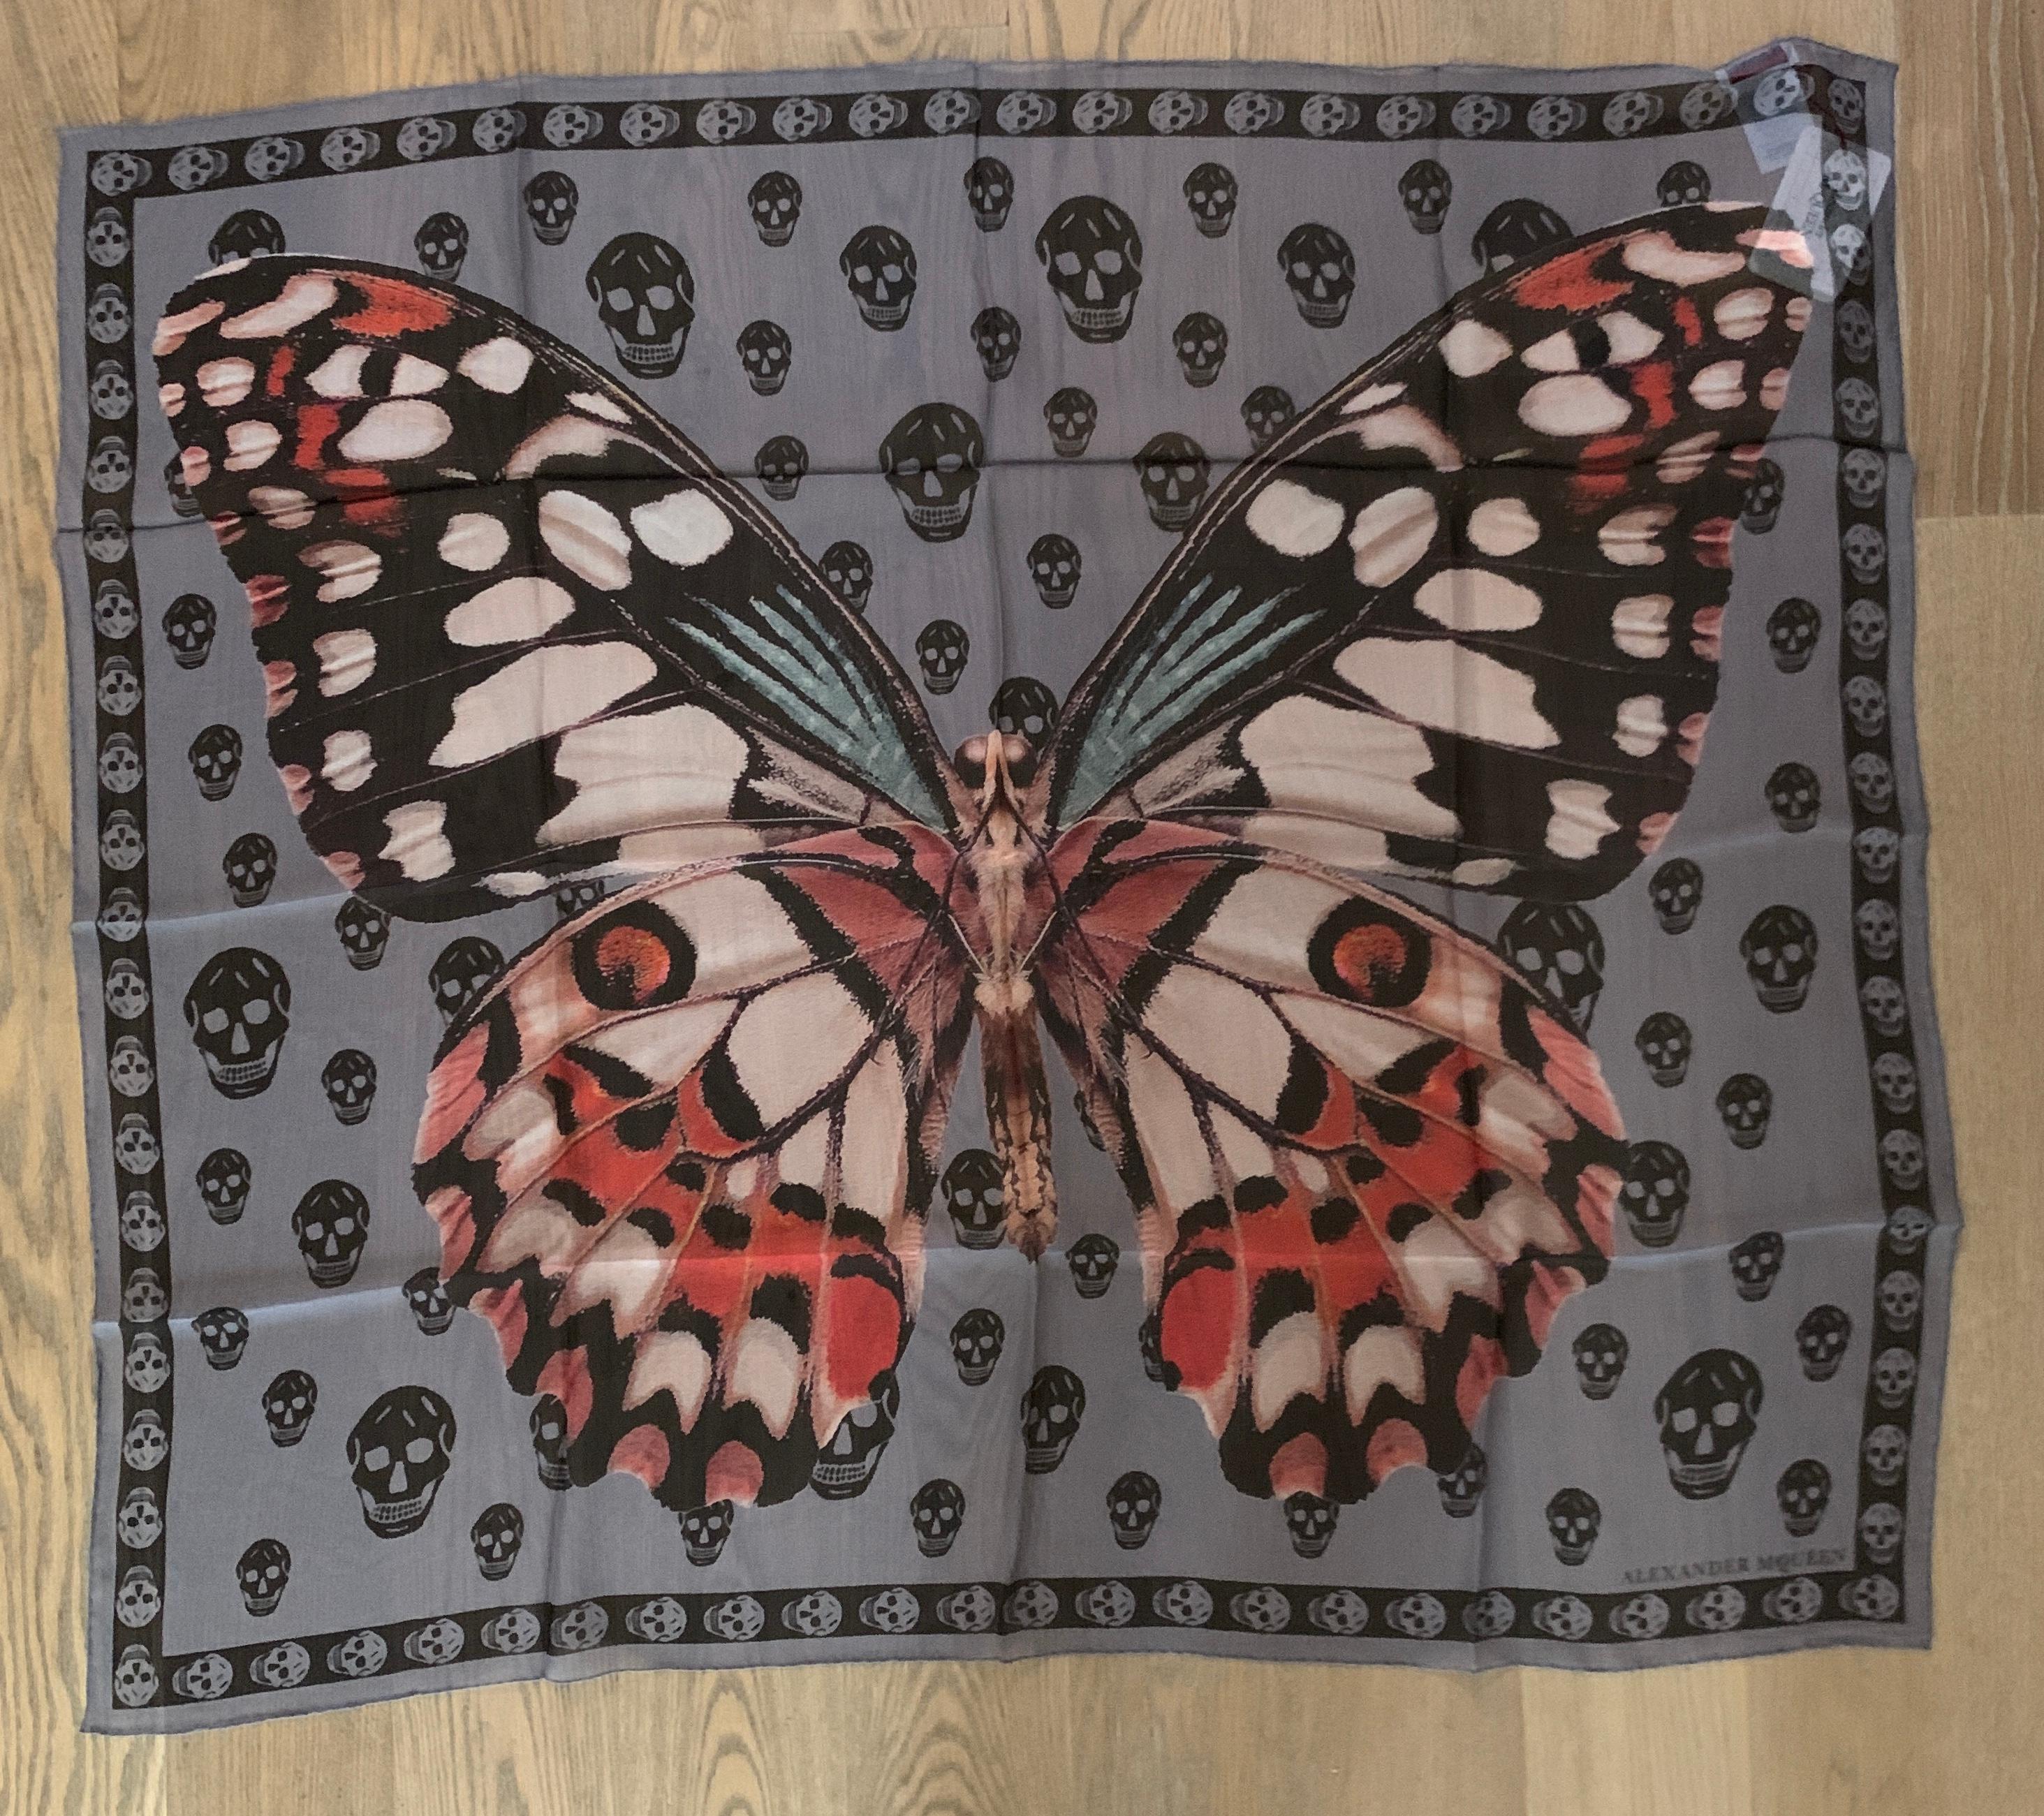 New Alexander McQueen large semi-sheer gray scarf featuring giant butterfly or moth with black skull print throughout background. Signed Alexander McQueen in logo at bottom corner. 

Purchased directly from McQueen store.

100% silk.

Approximately